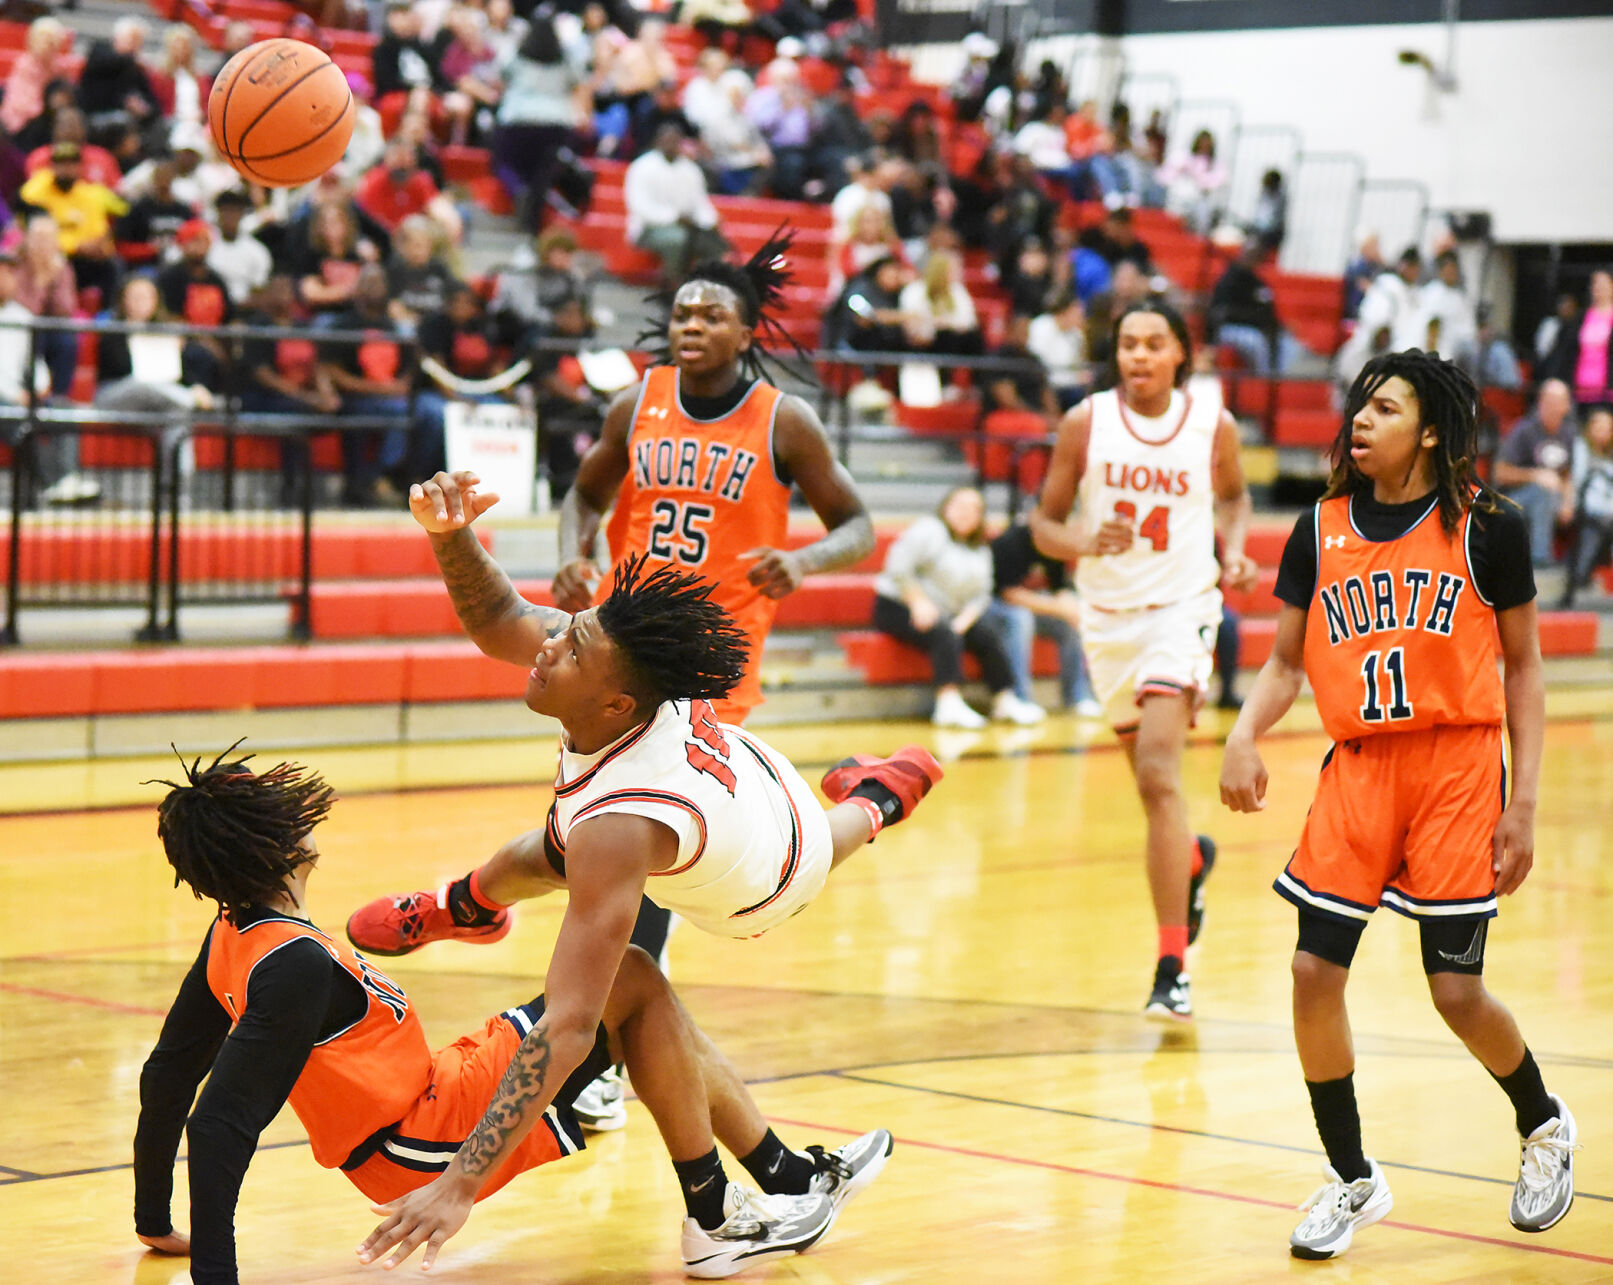 Greenville Lions Lose 61-53 to McKinney North, Anthony Johnson reaches 1,000-point milestone